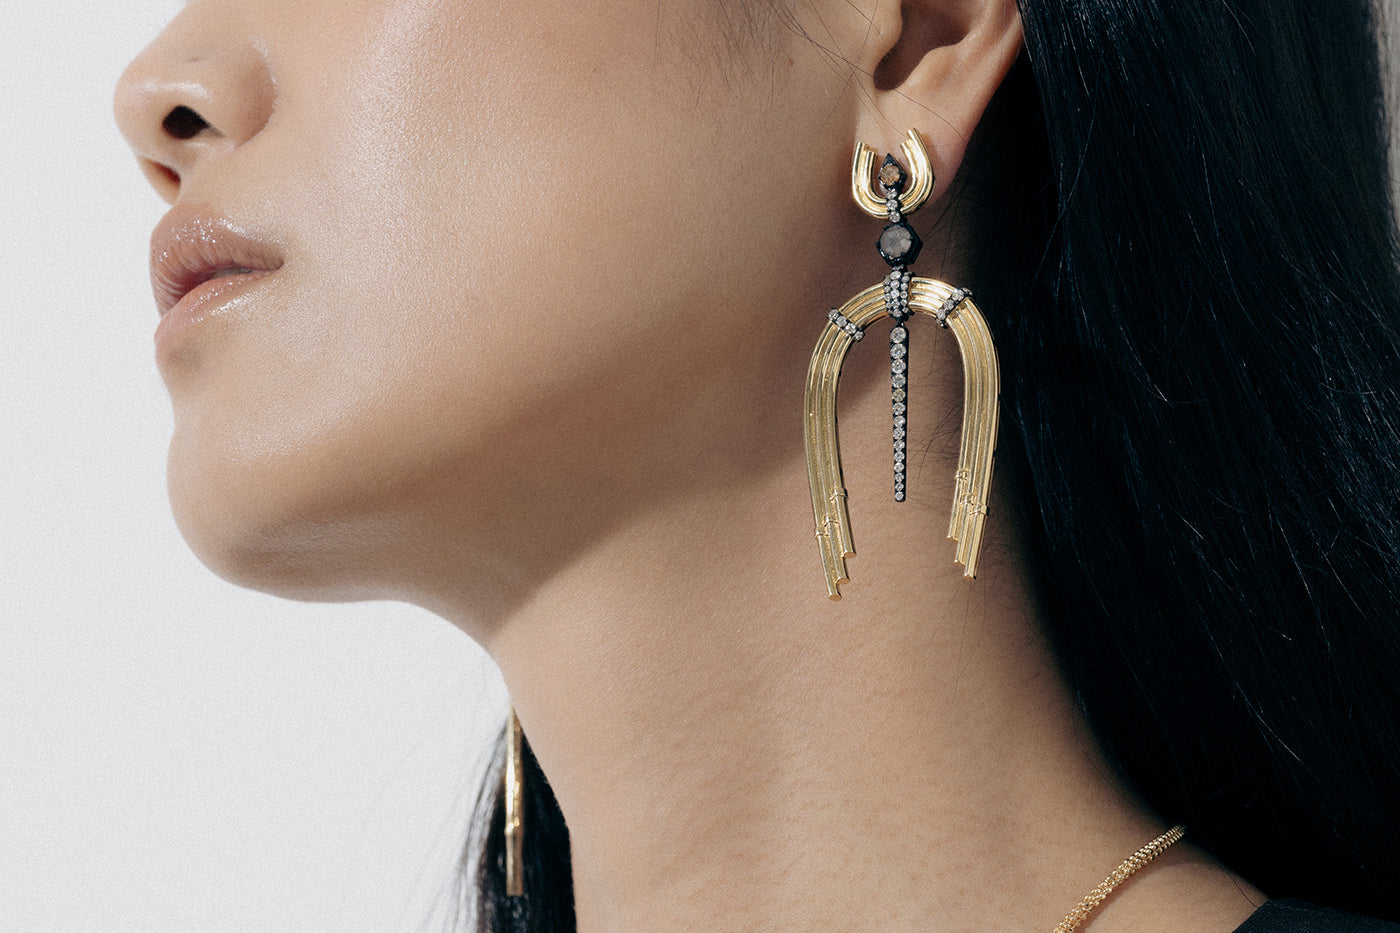 Yellow Gold Earrings with Diamond-lined, Rhodium plated features and horseshoe shapes - Model shot